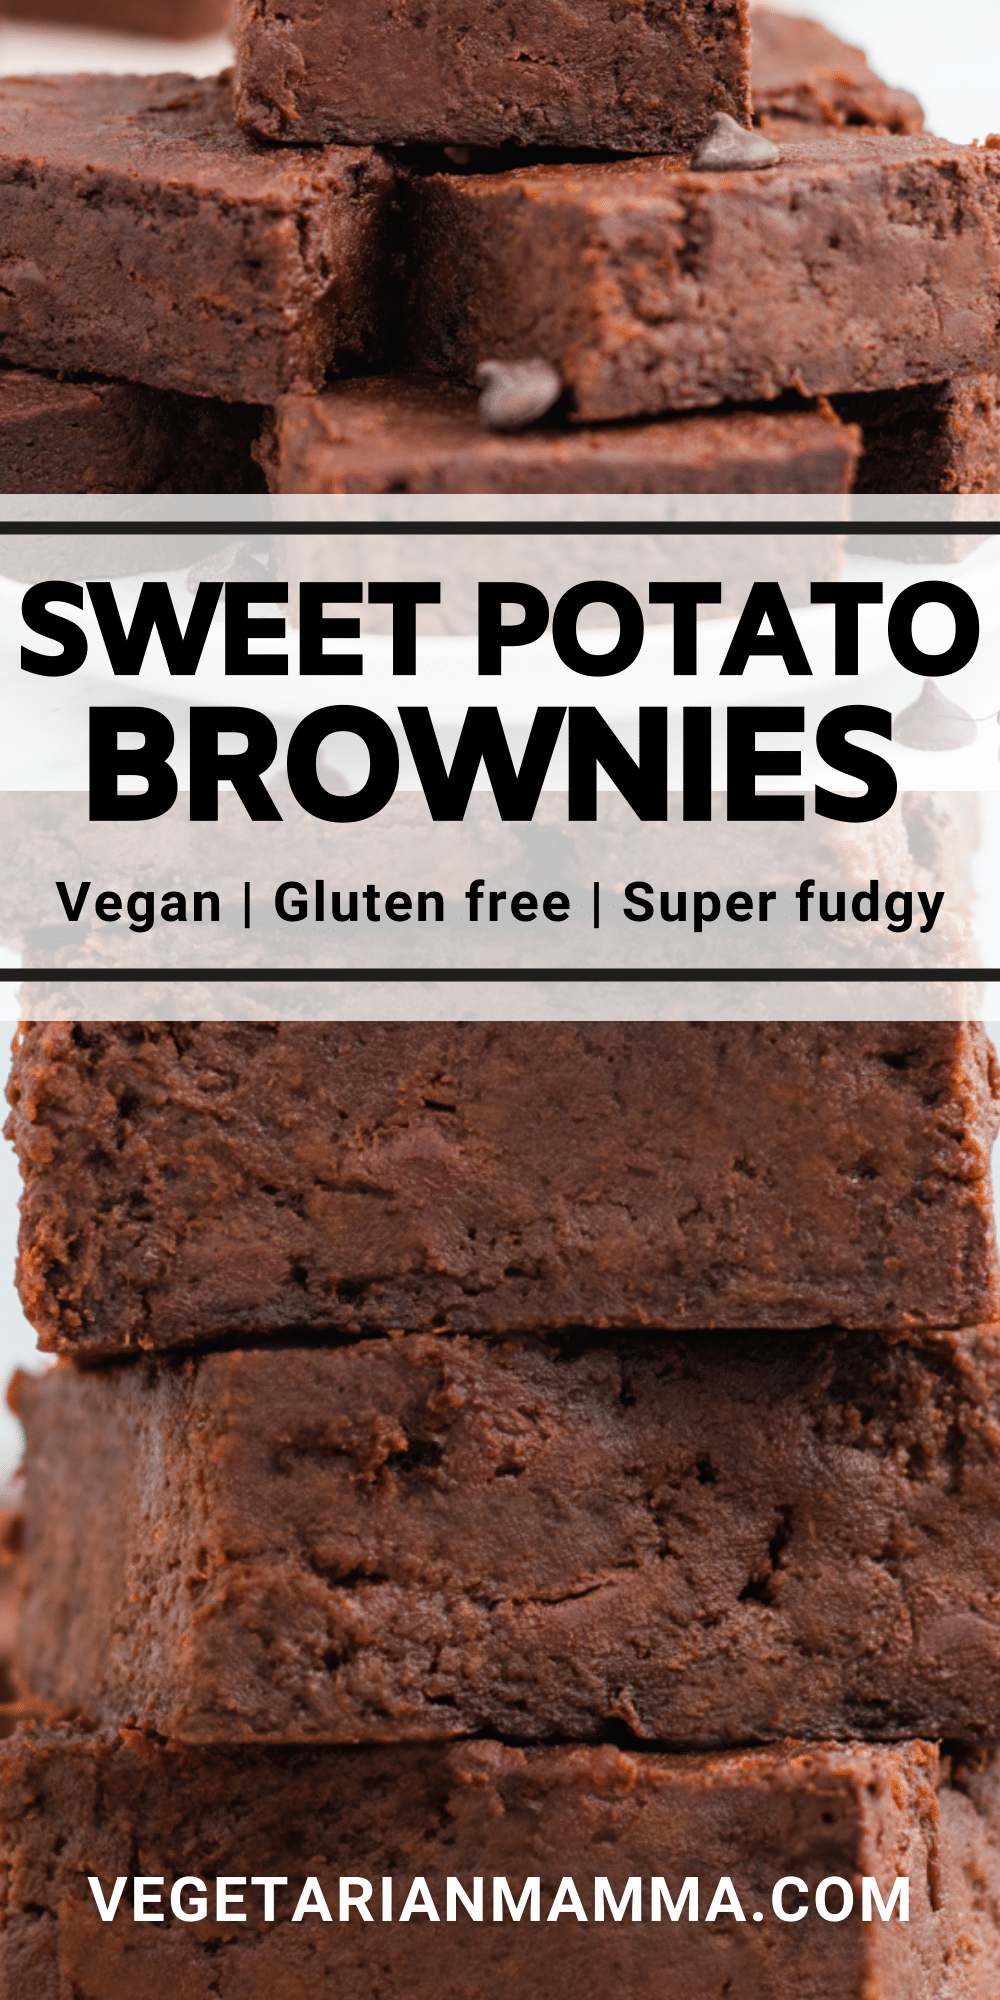 A stack of gluten-free sweet potato brownies with overlay text